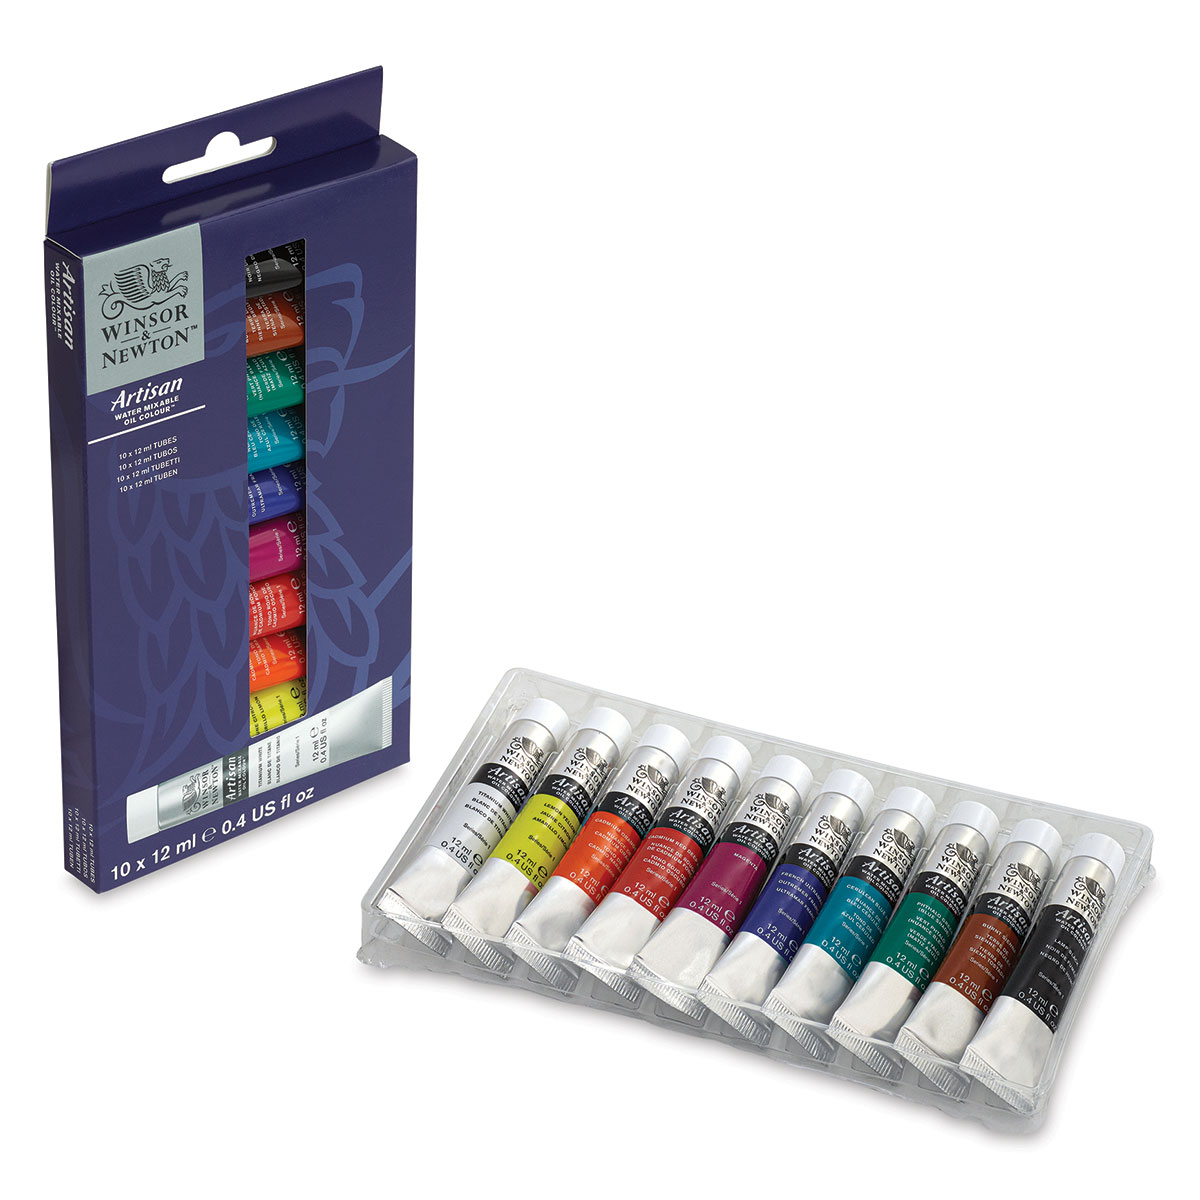 Artisan Water Mixable Oil Colour Paint - Art Supplies from Crafty Arts UK